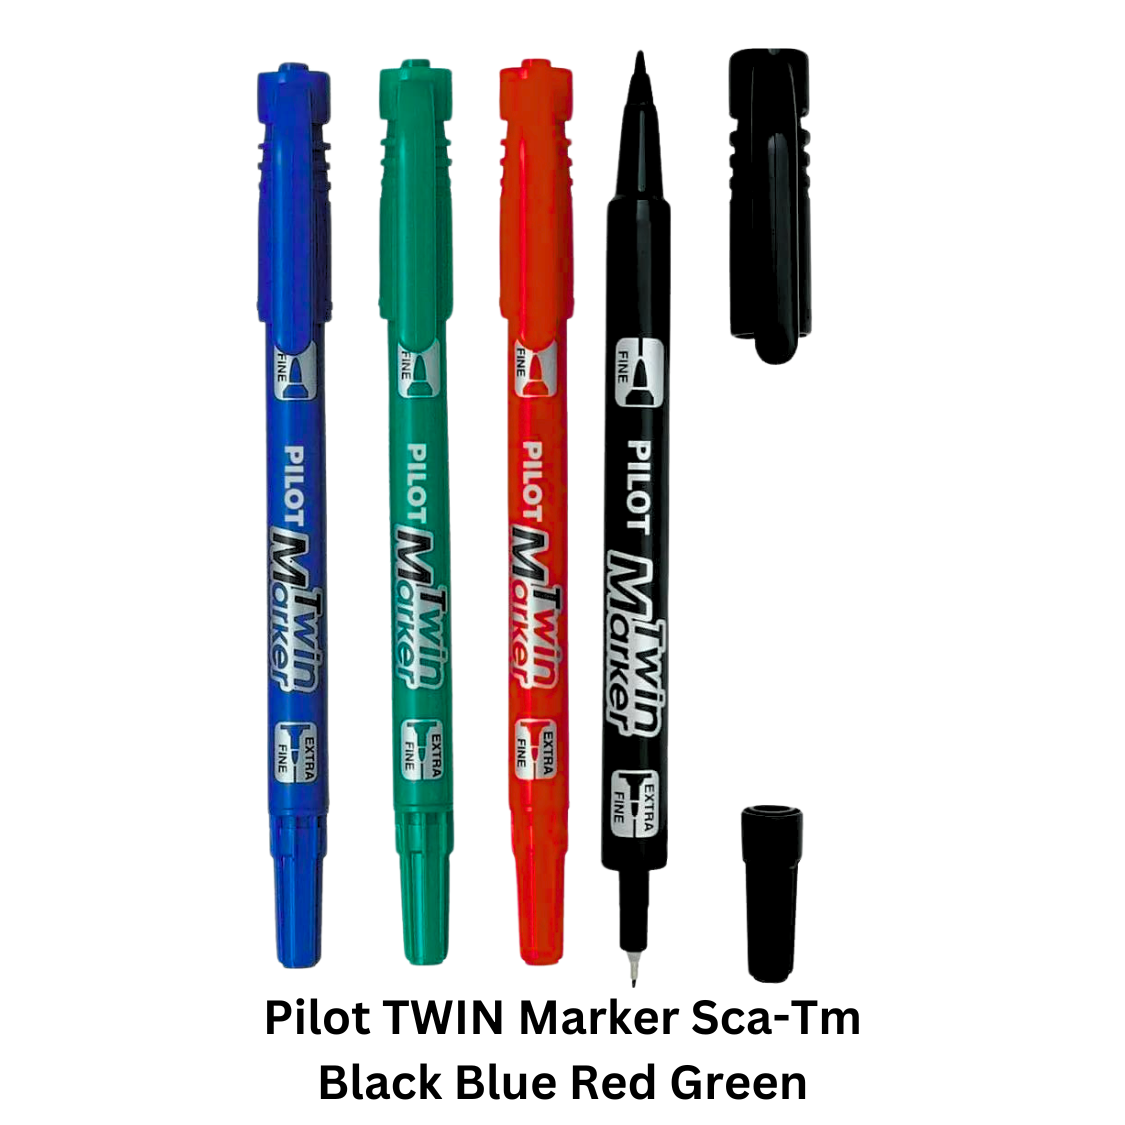 Pilot TWIN Marker Sca-Tm Black Blue Red Green - YOUTOO TRADING 